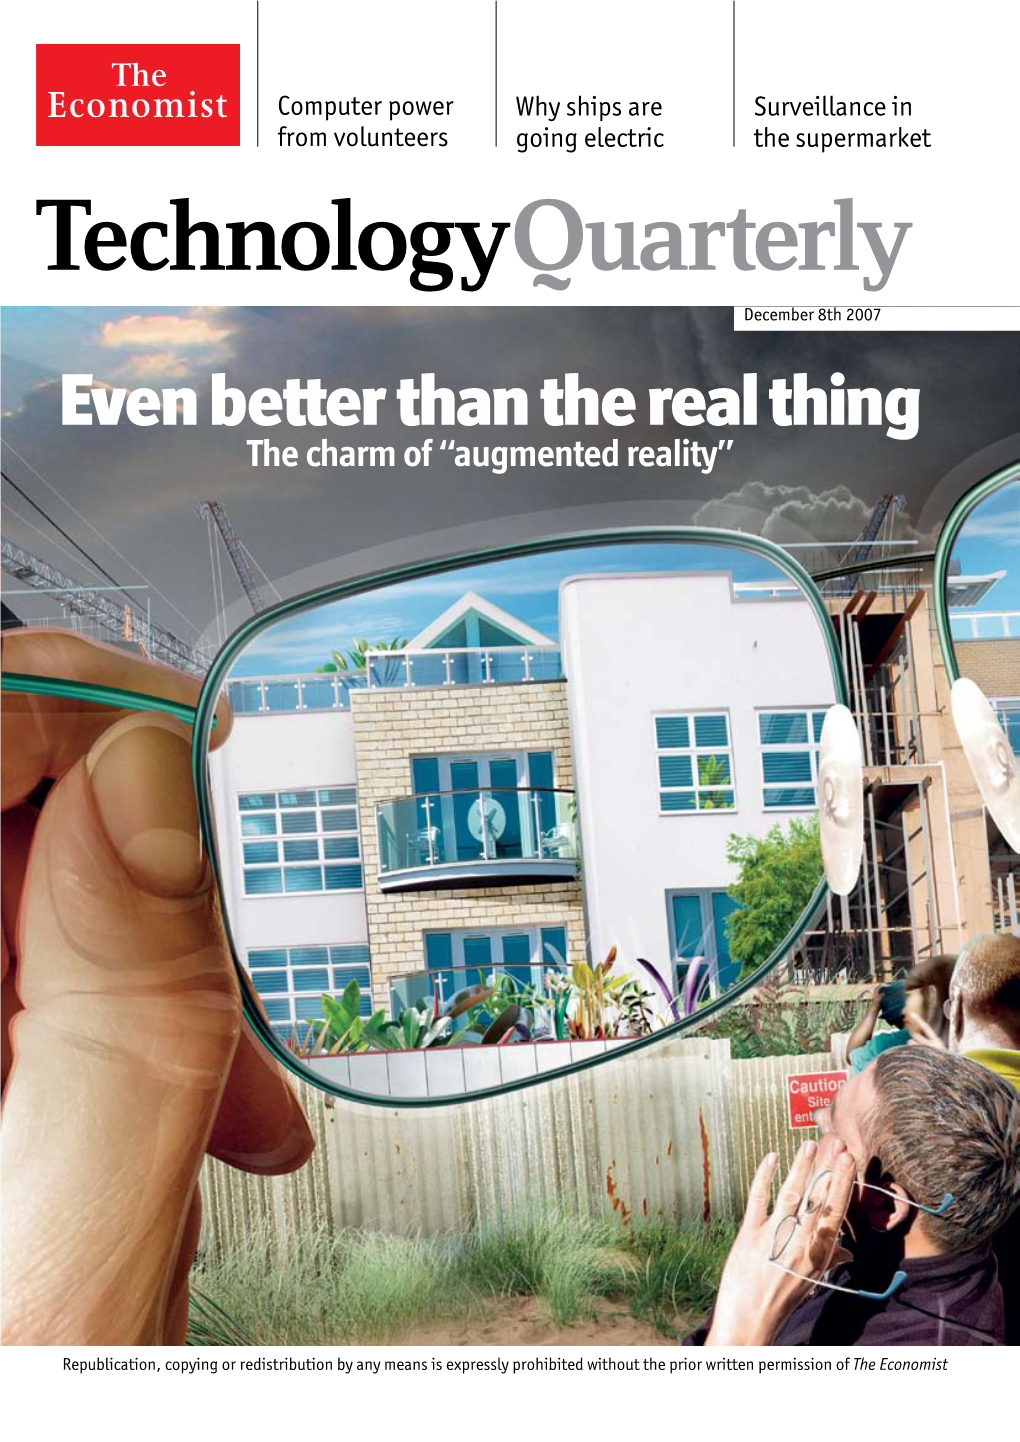 Technologyquarterly December 8Th 2007 Even Better Than the Real Thing the Charm of “Augmented Reality”